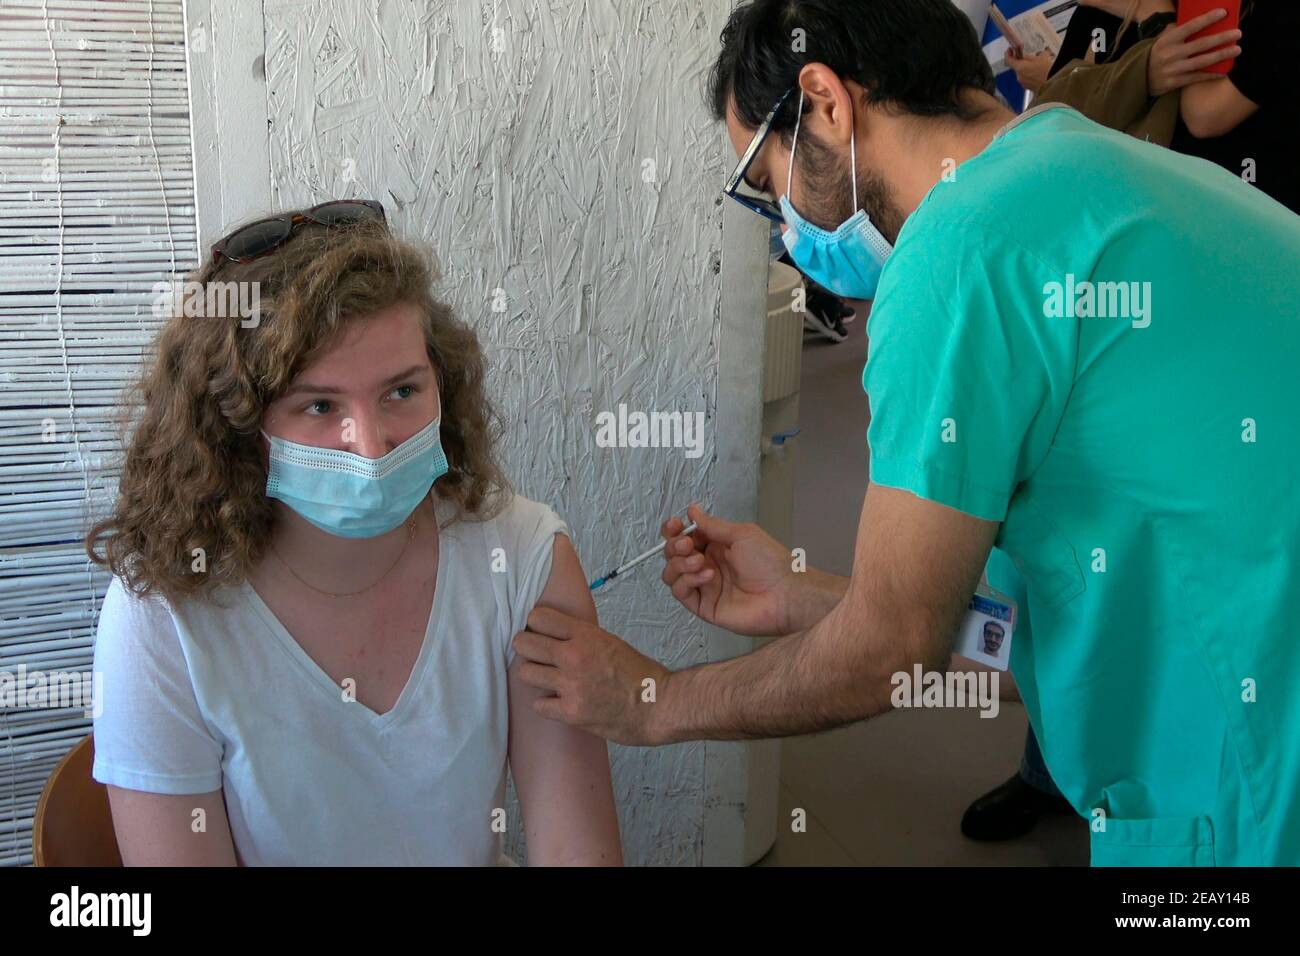 A medical worker administers the Pfizer-BioNTech COVID-19 vaccine to a foreign resident at the Sourasky Medical Centre for foreign nationals on February 09, 2021, in Tel Aviv, Israel. A month and a half after Israel launched its world-leading coronavirus vaccination campaign, Tel Aviv-Yafo Municipality and the Sourasky Medical Center (Ichilov Hospital) started administering Pfizer-BioNTech coronavirus vaccines free of charge to the city's foreign nationals, many of whom are undocumented asylum seekers. Stock Photo